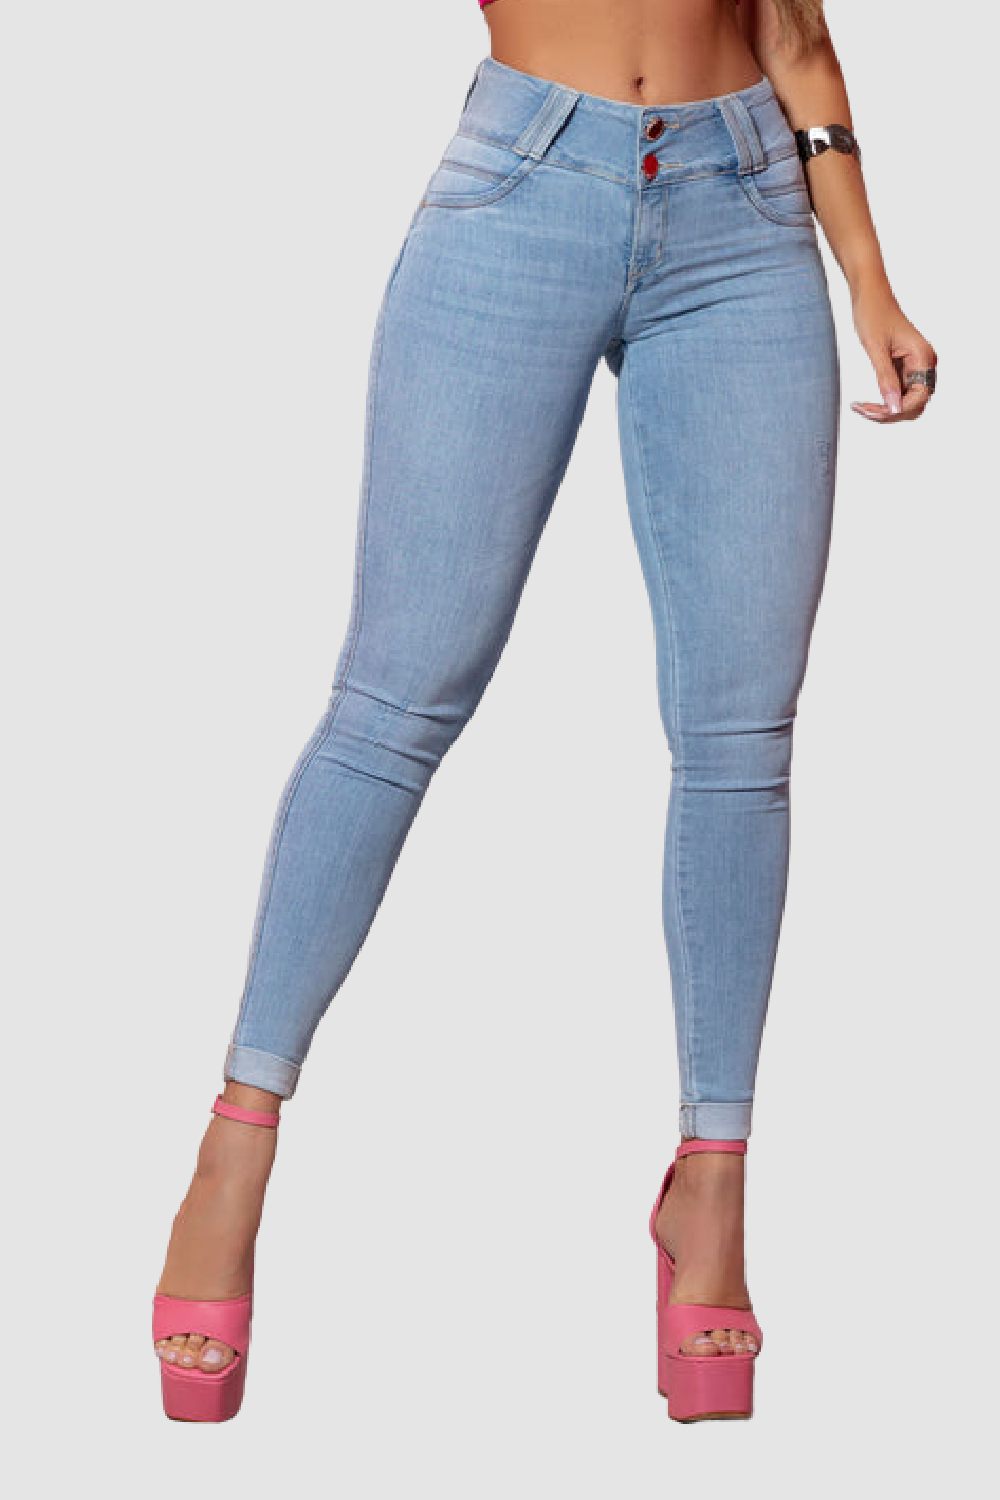 Light Wash Skinny Jeans – URock Couture